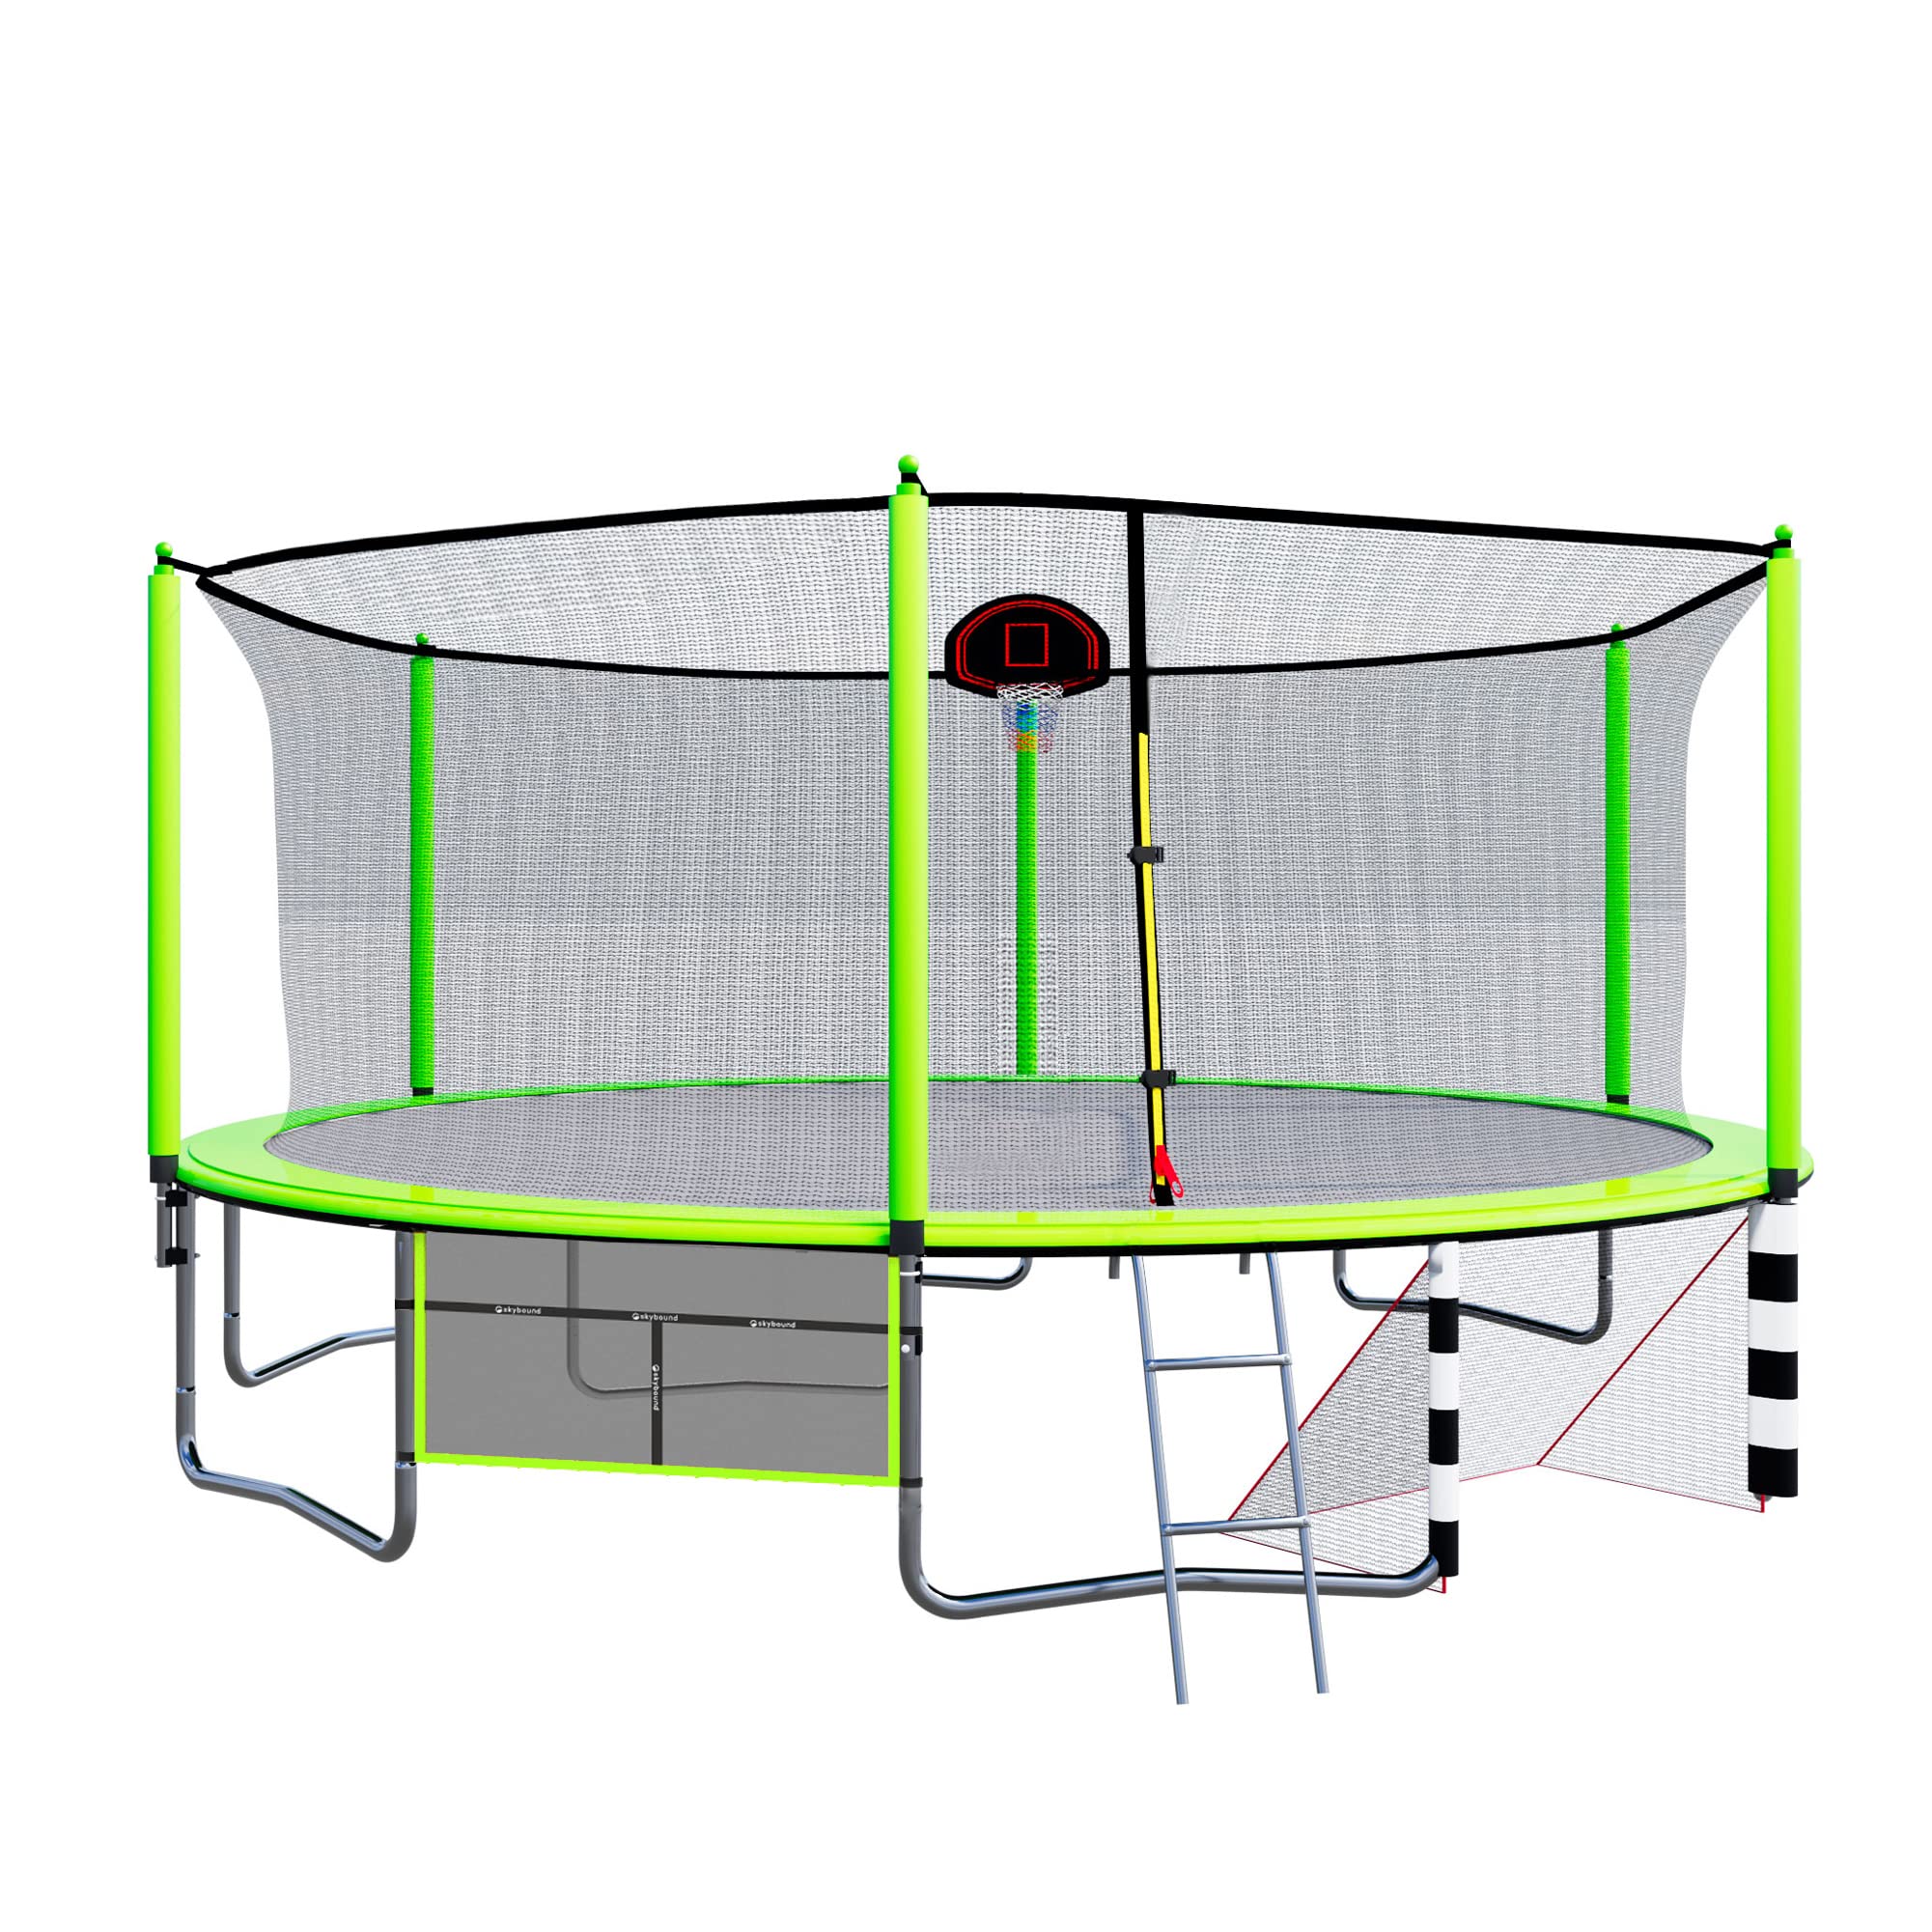 SkyBound 16ft Trampoline with Enclosure Net, Outdoor Trampoline for Kids and Adults - ASTM Approved - Recreational Trampolines w